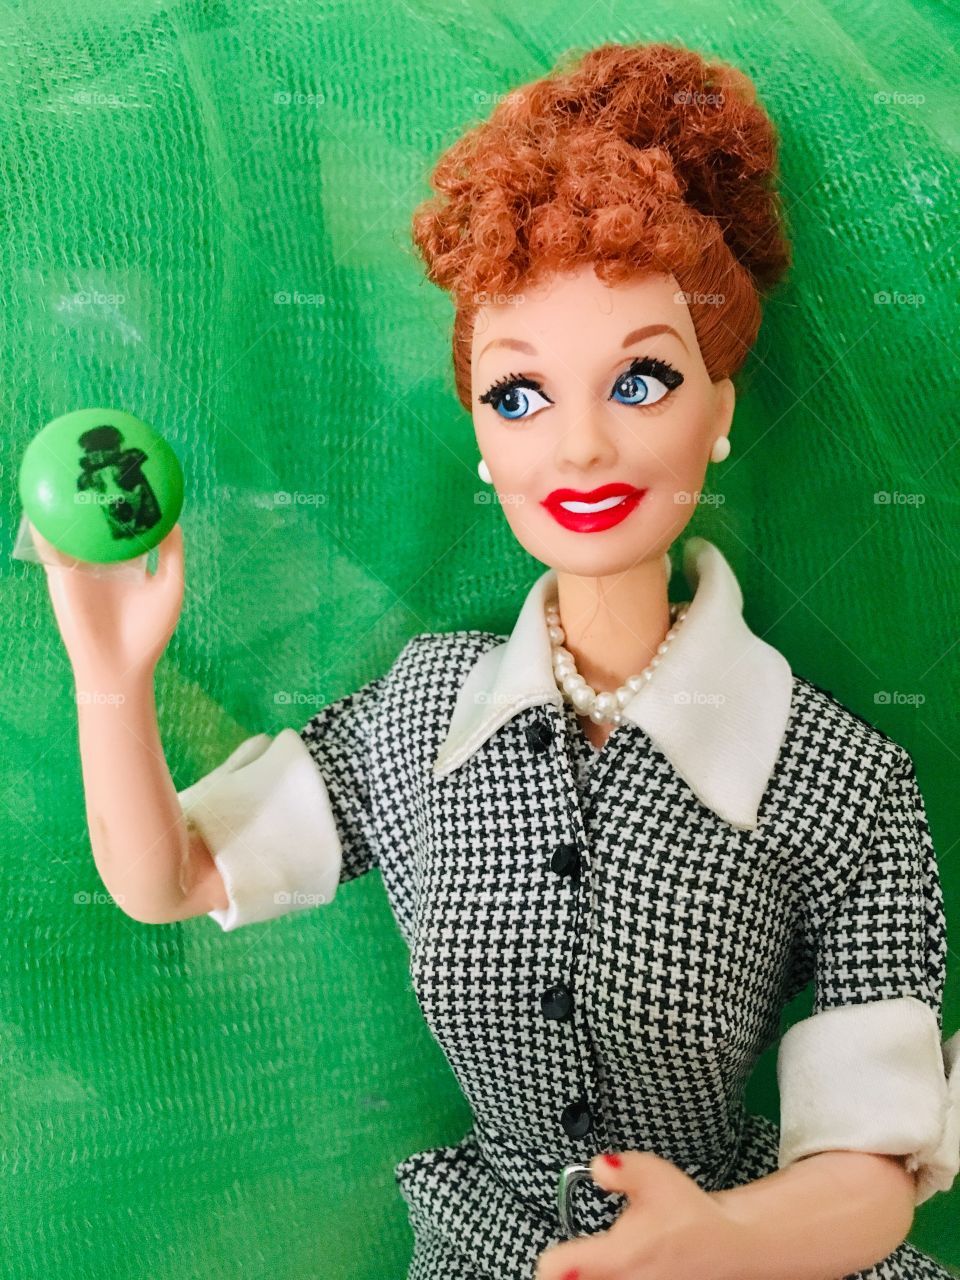 I Love Lucy Barbie holding an M&M